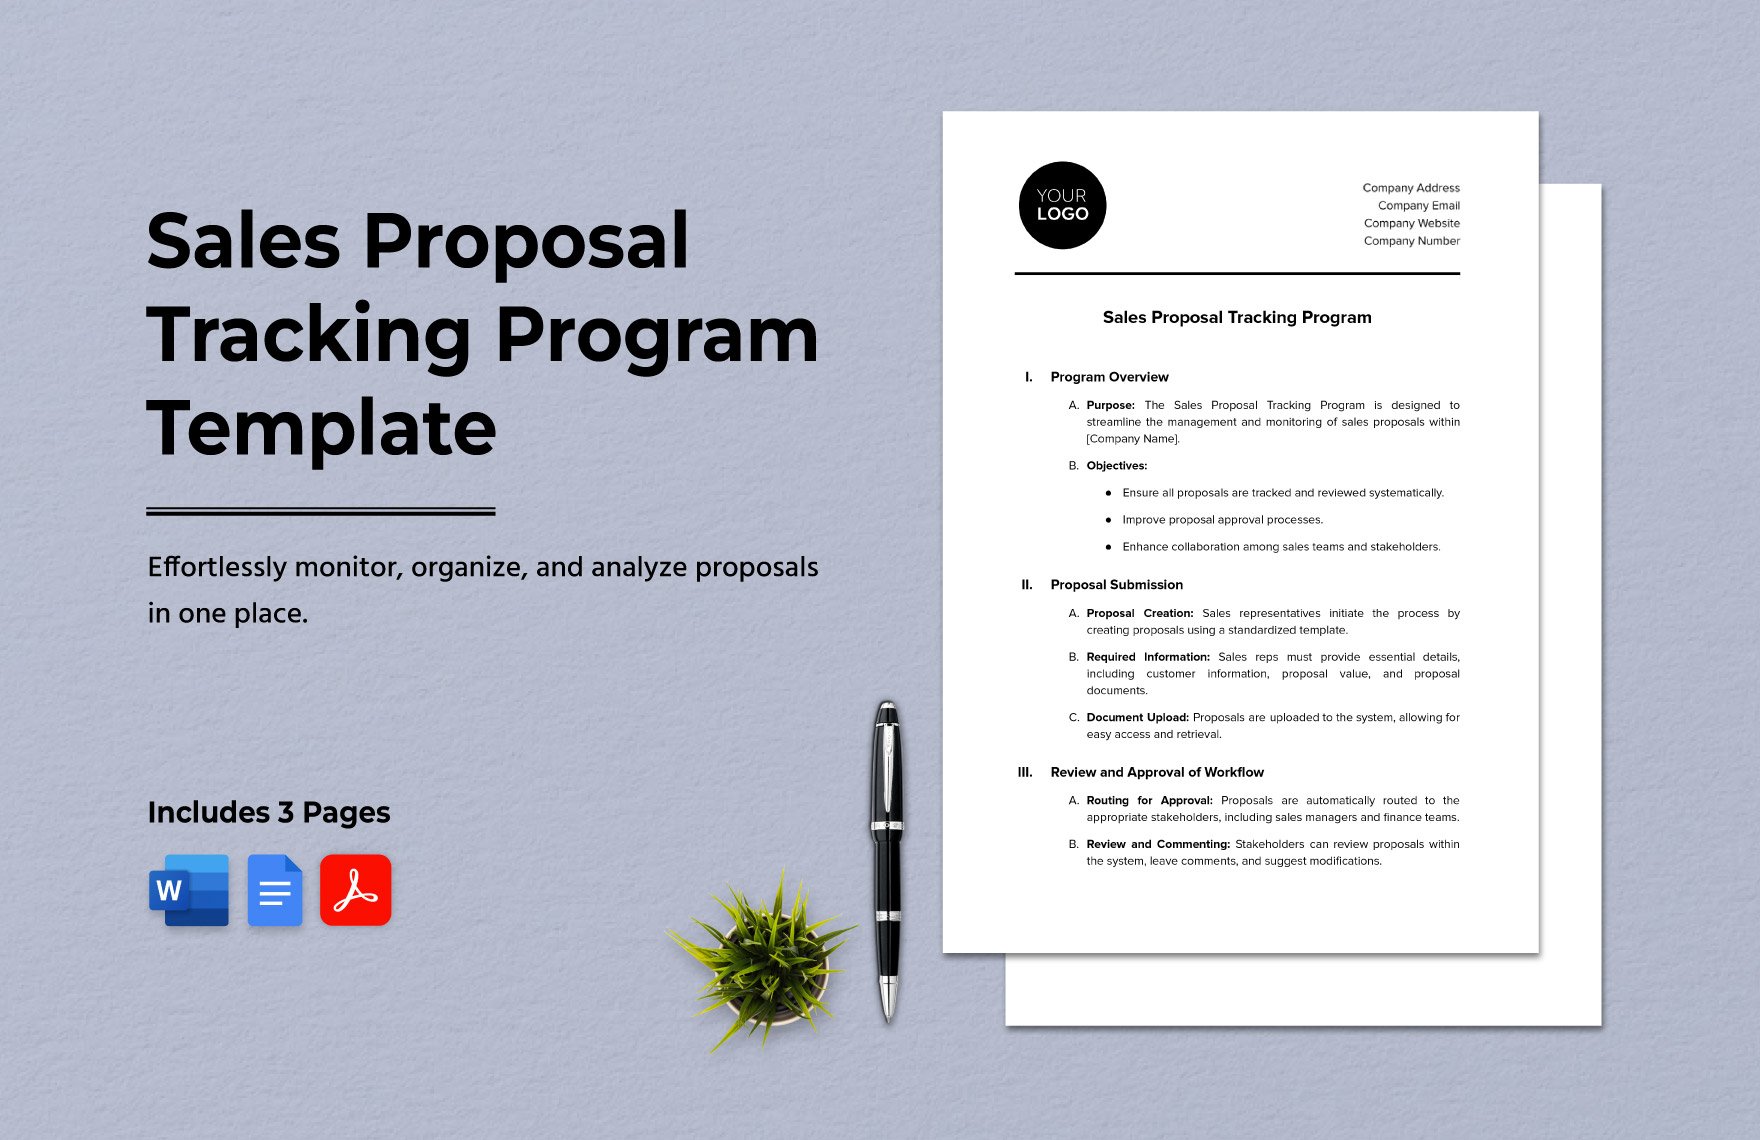 Sales Proposal Tracking Program Template